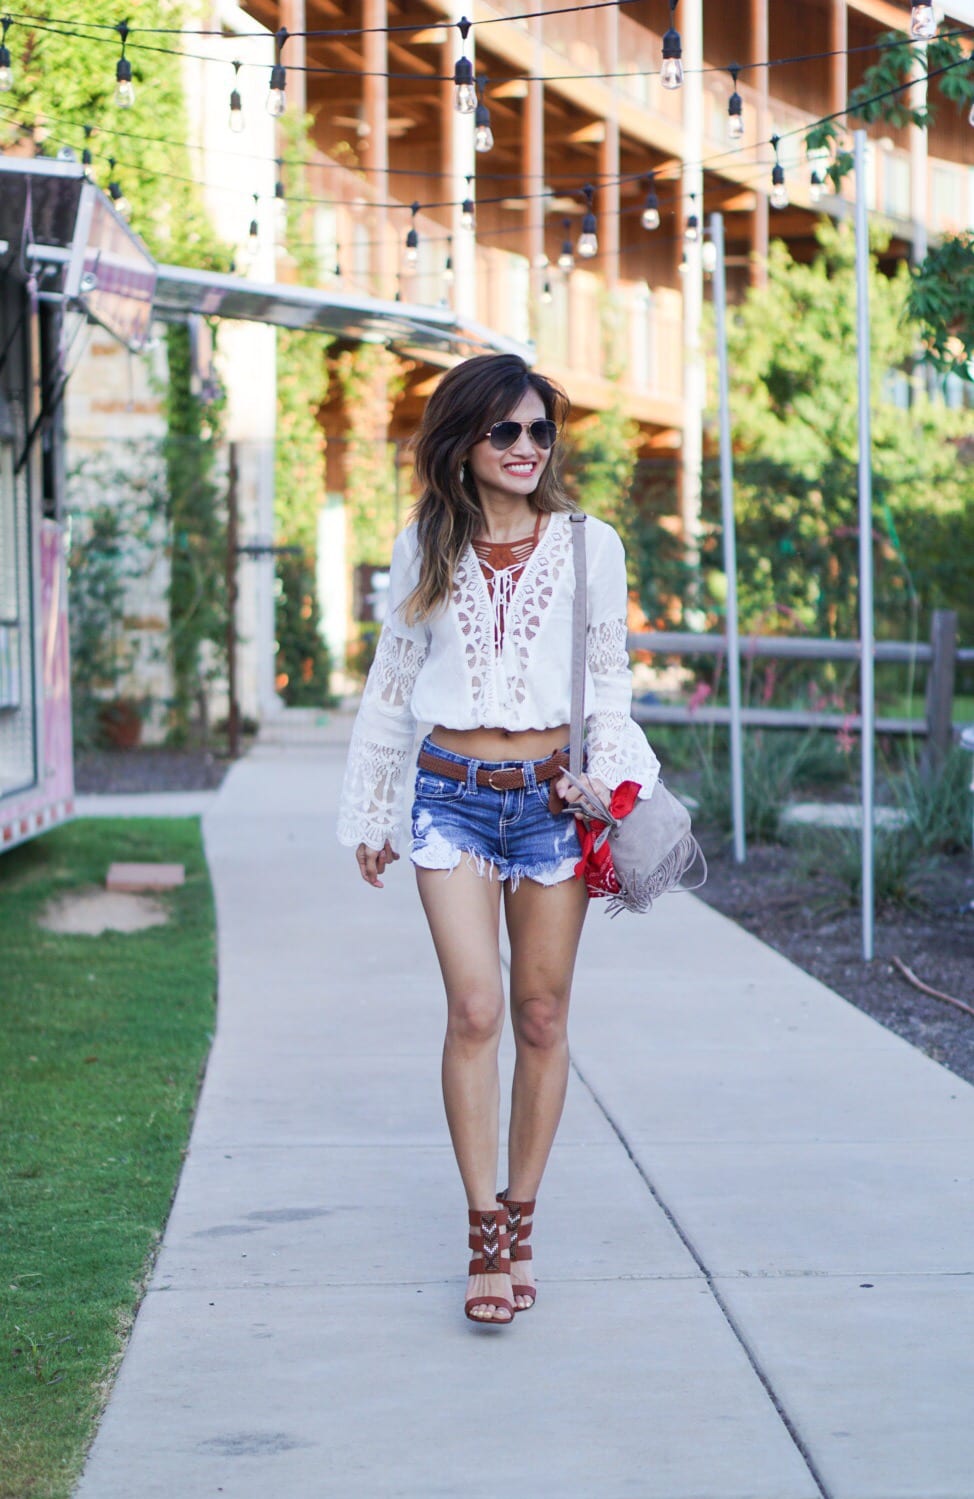 Boho Chic - Lace ups and Bralettes